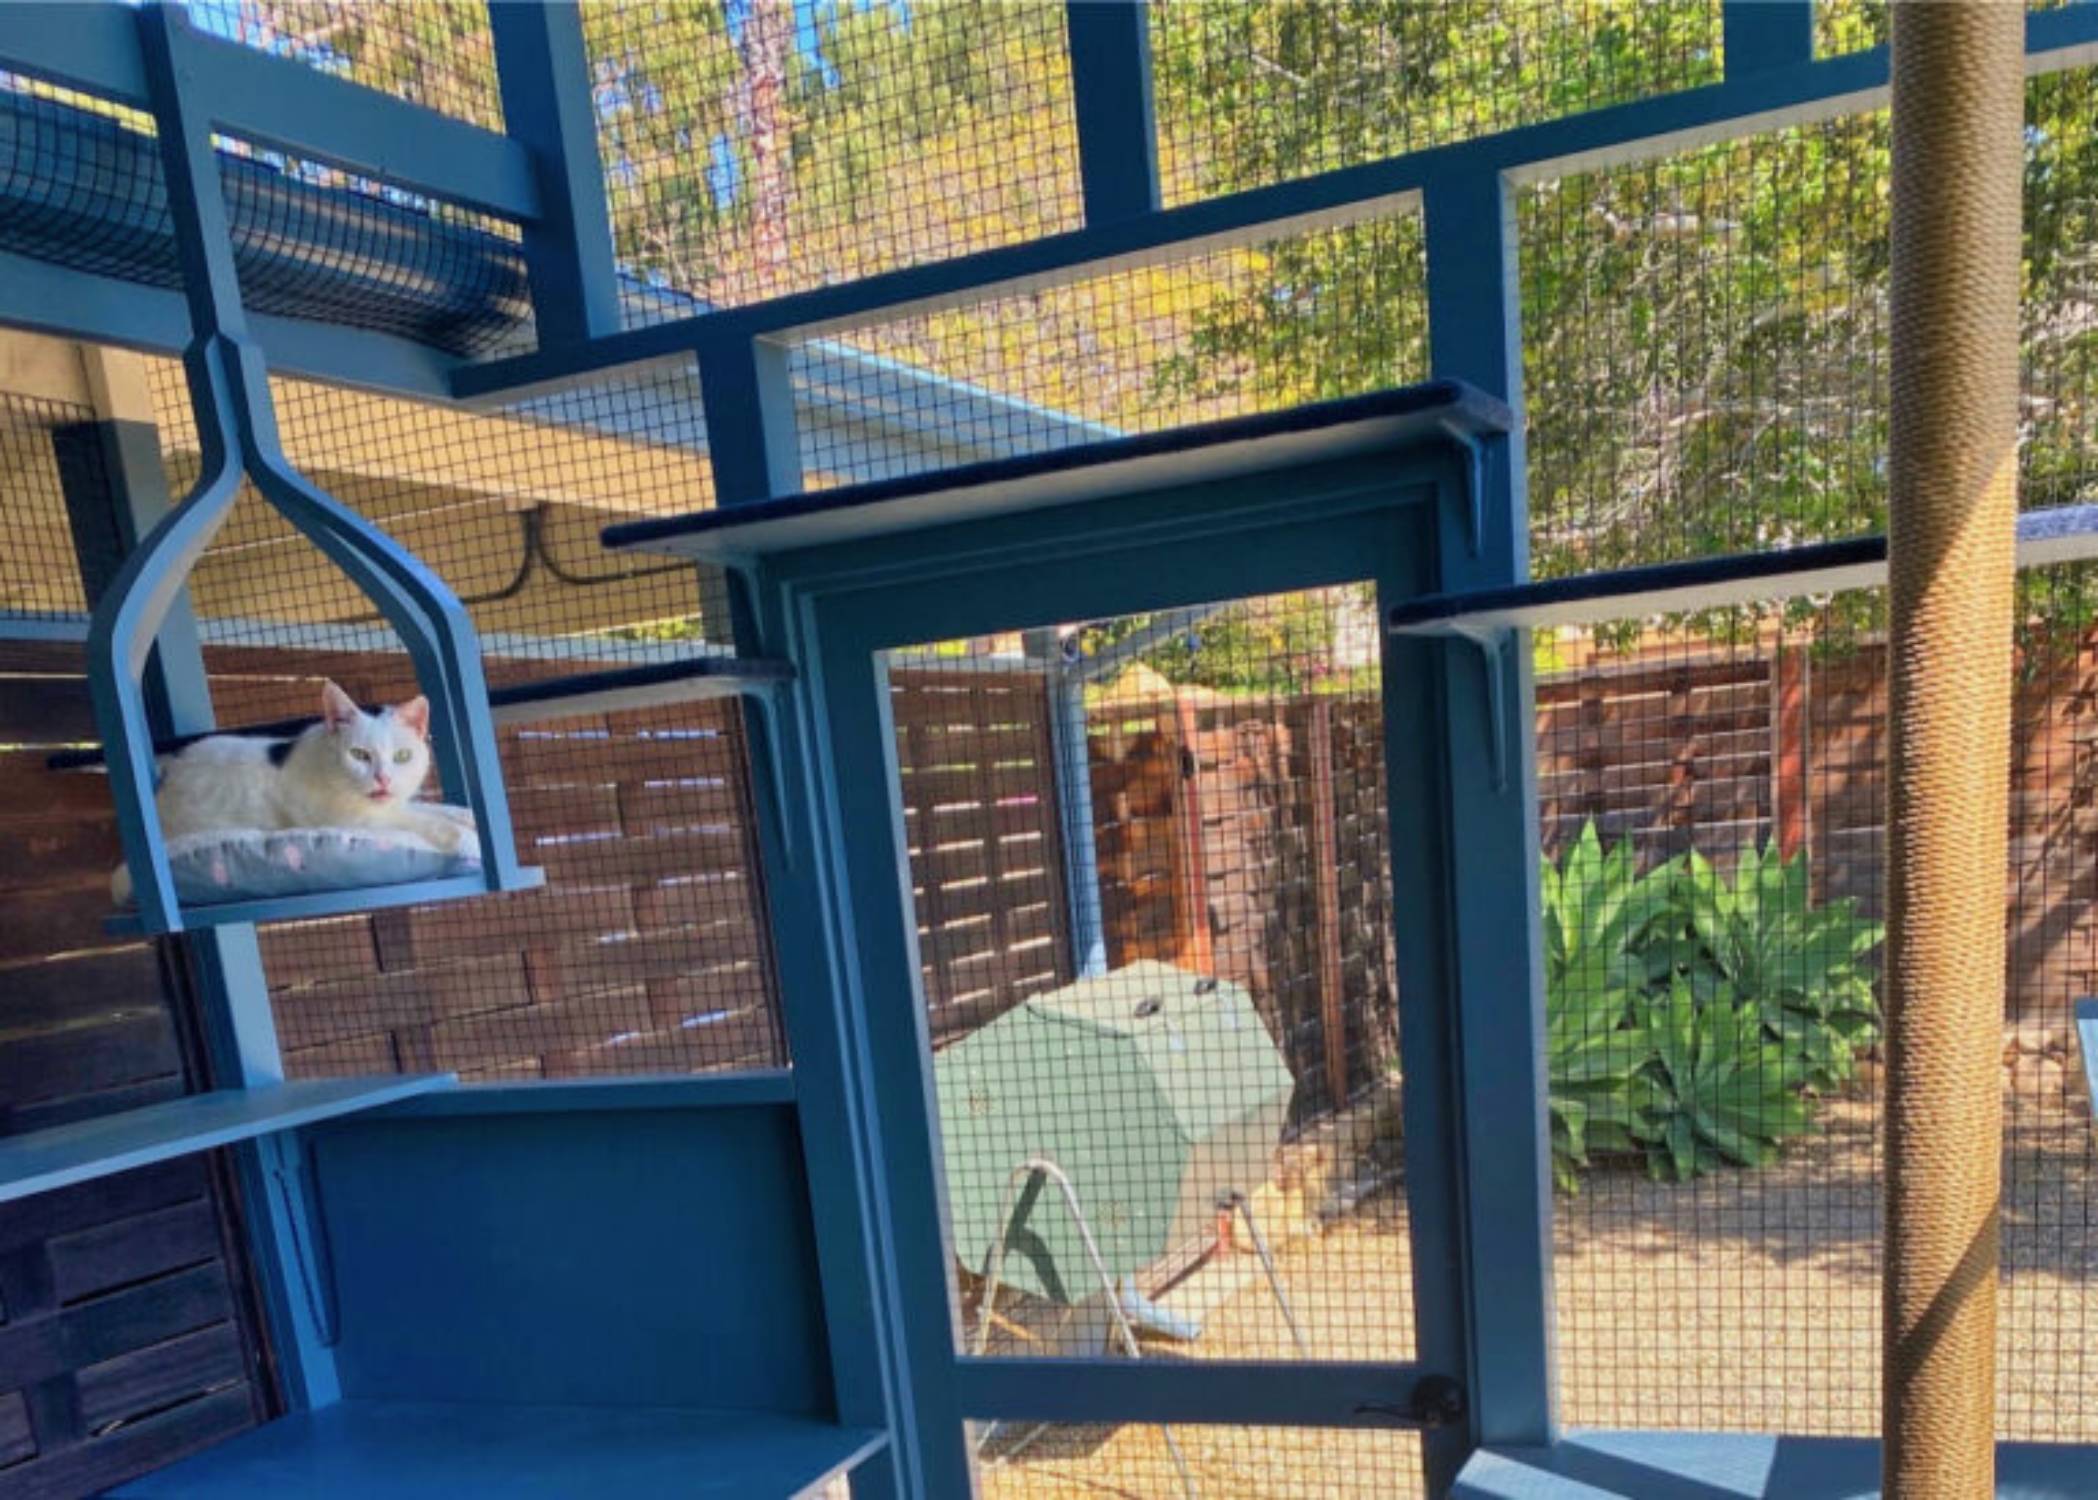 View from inside a catio with white cat on a swing